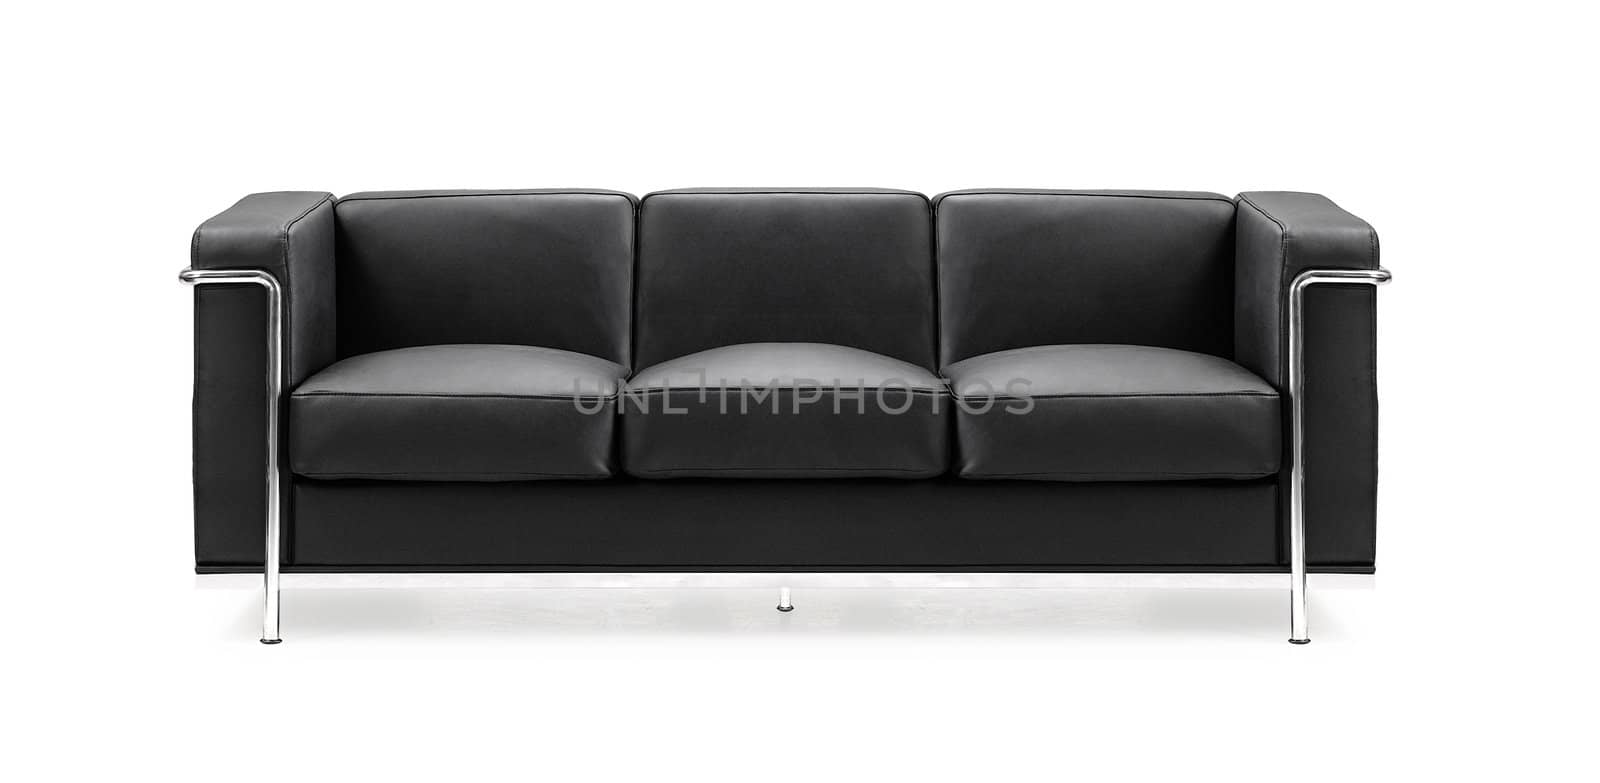 Image of a modern black leather sofa isolated